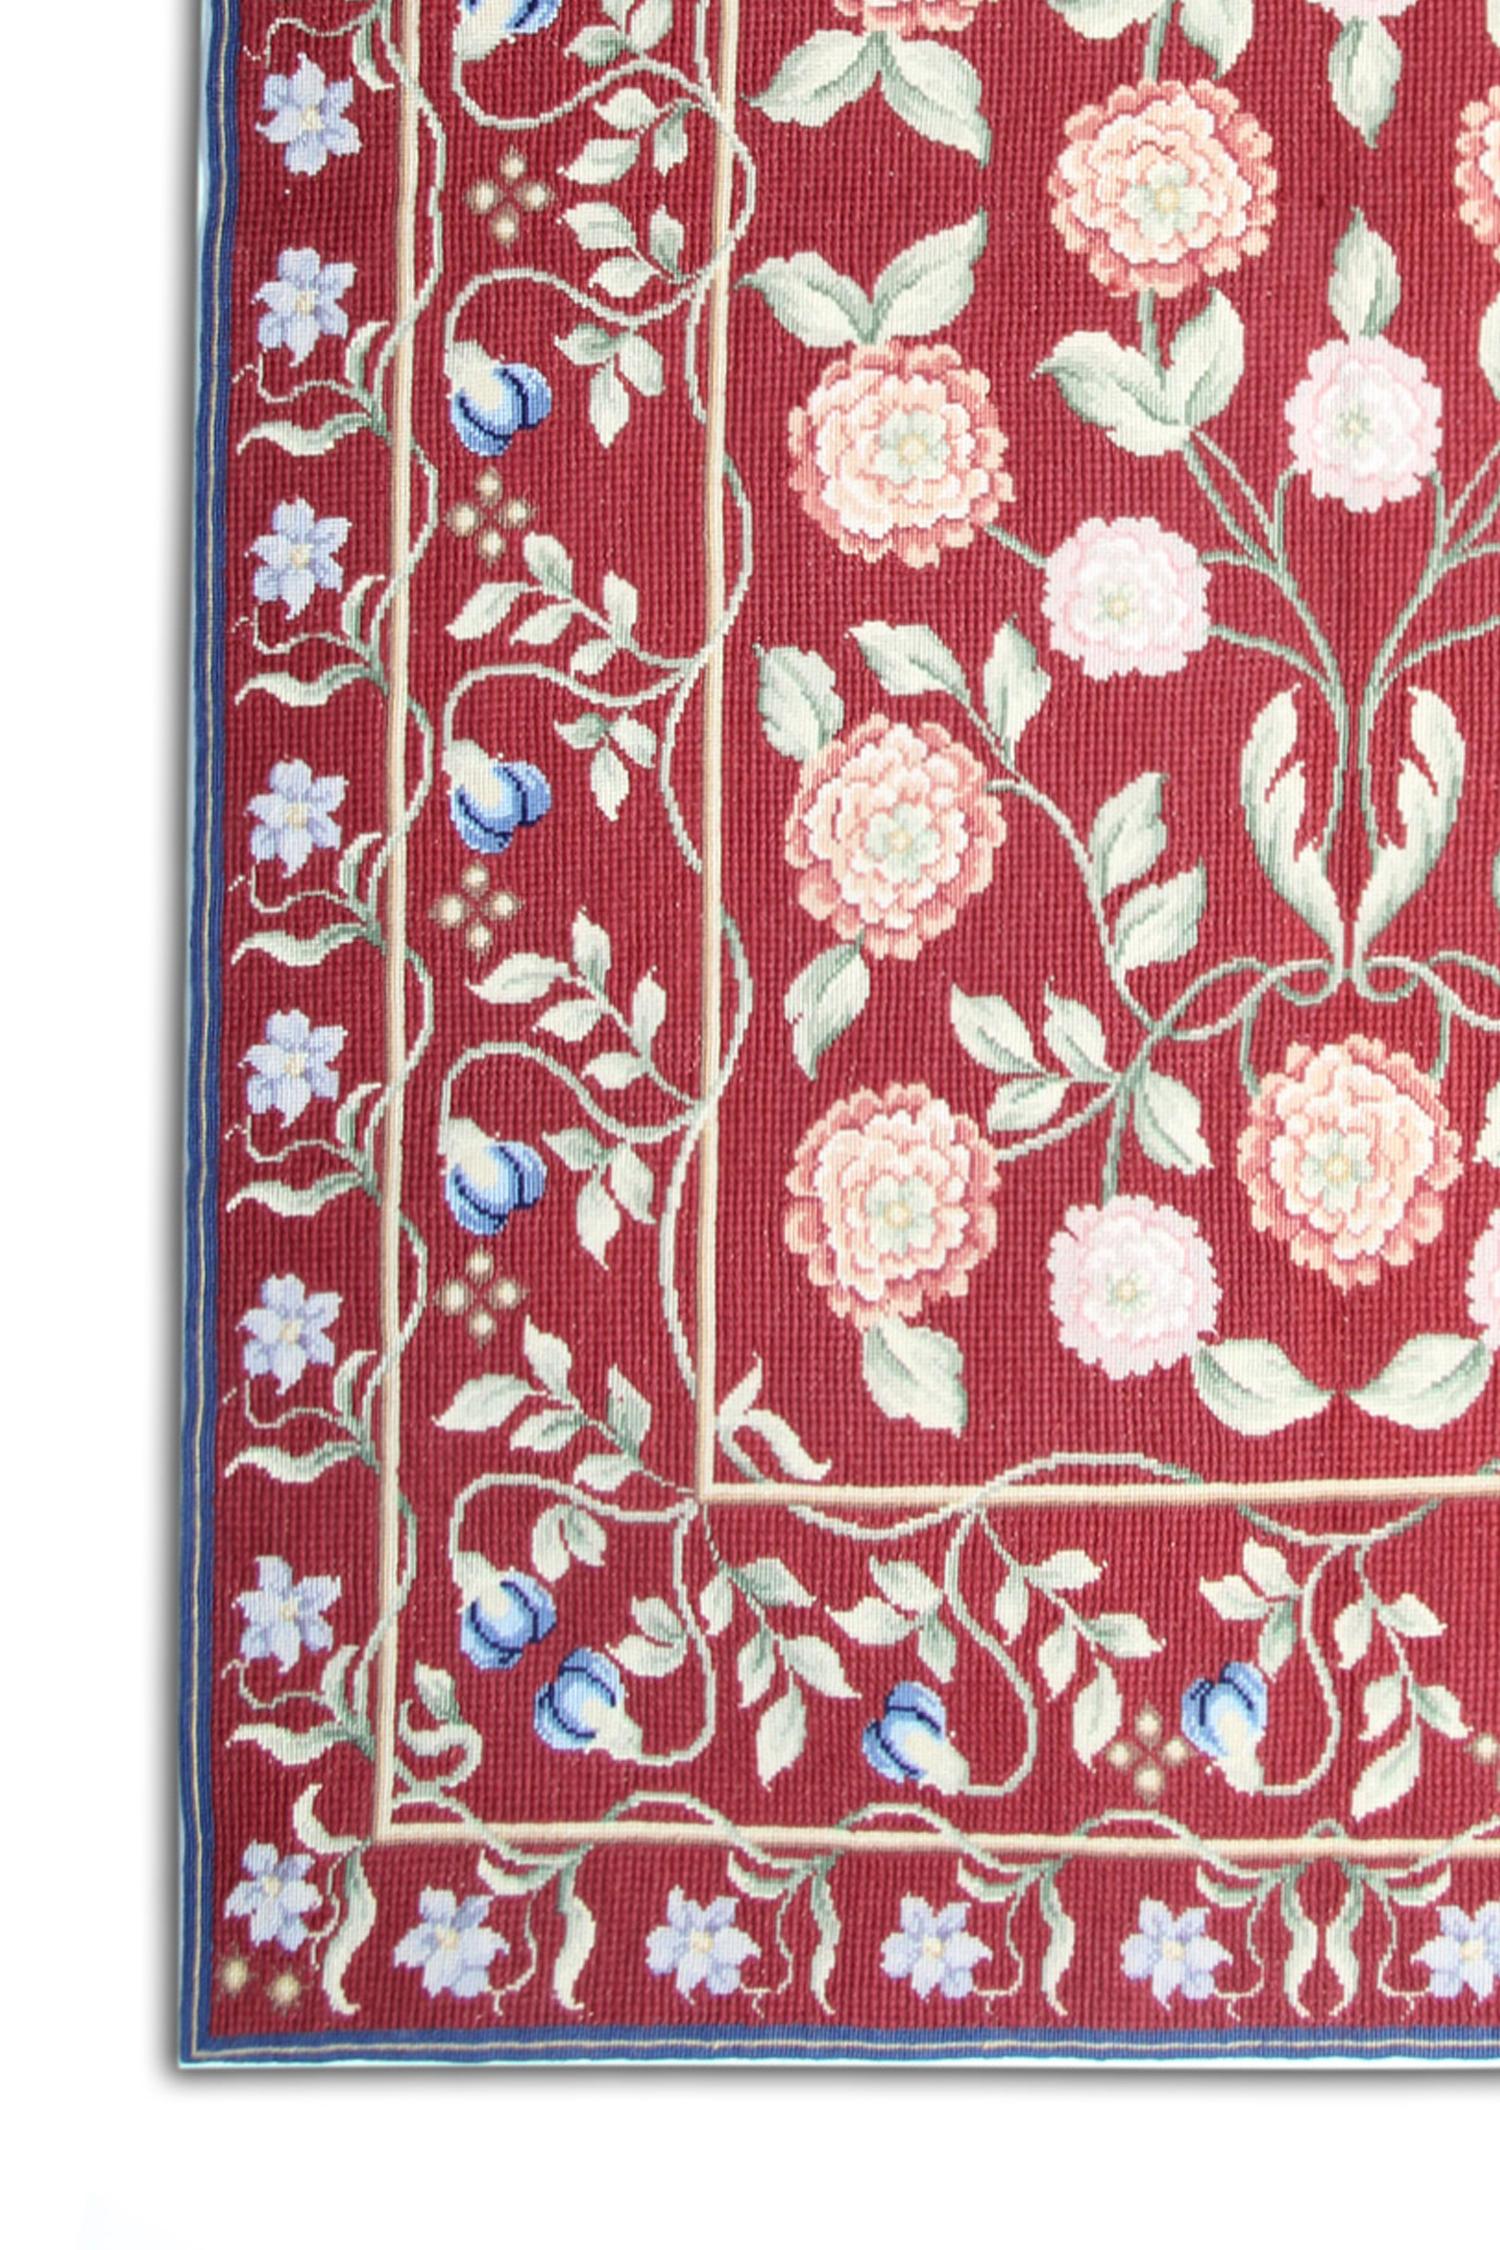 This beautifully handwoven Aubusson rug is sure to make a great accent piece in any room it’s introduced too. Deep red sits as the background color, which has then been decorated with a pink, green and blue, symmetrical floral arrangement. The